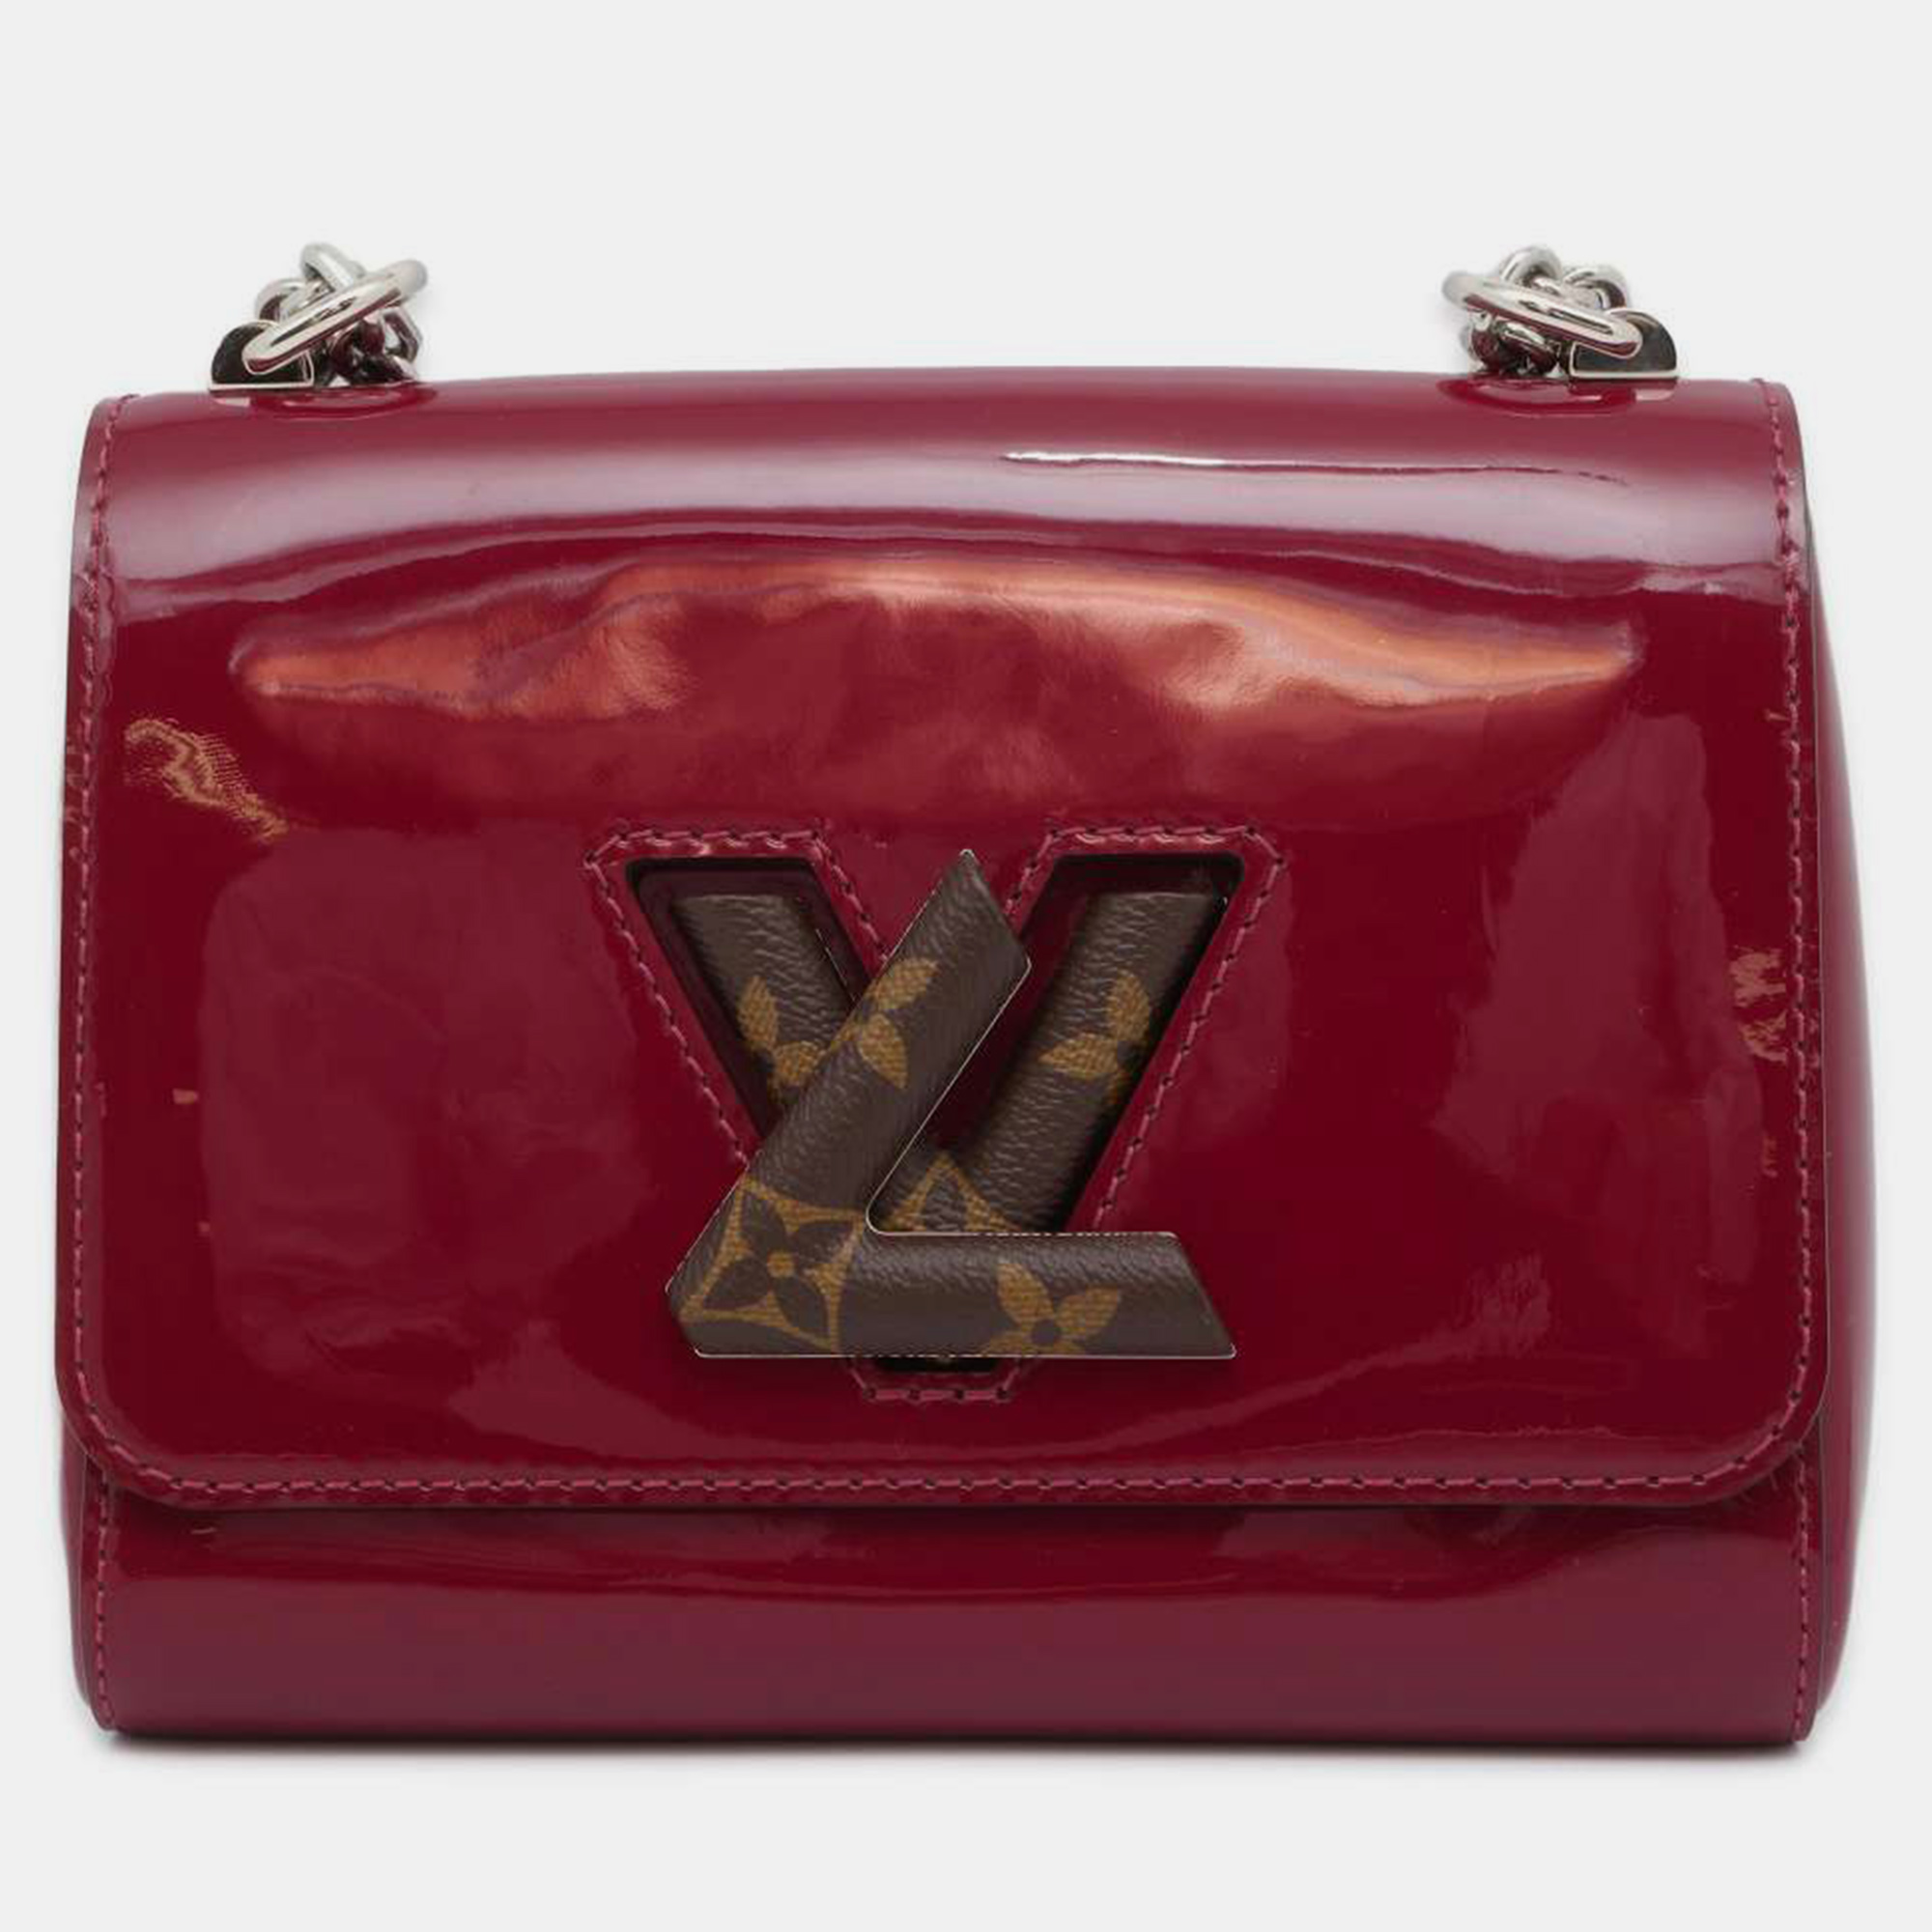 Louis vuitton red patent leather twist pm bag